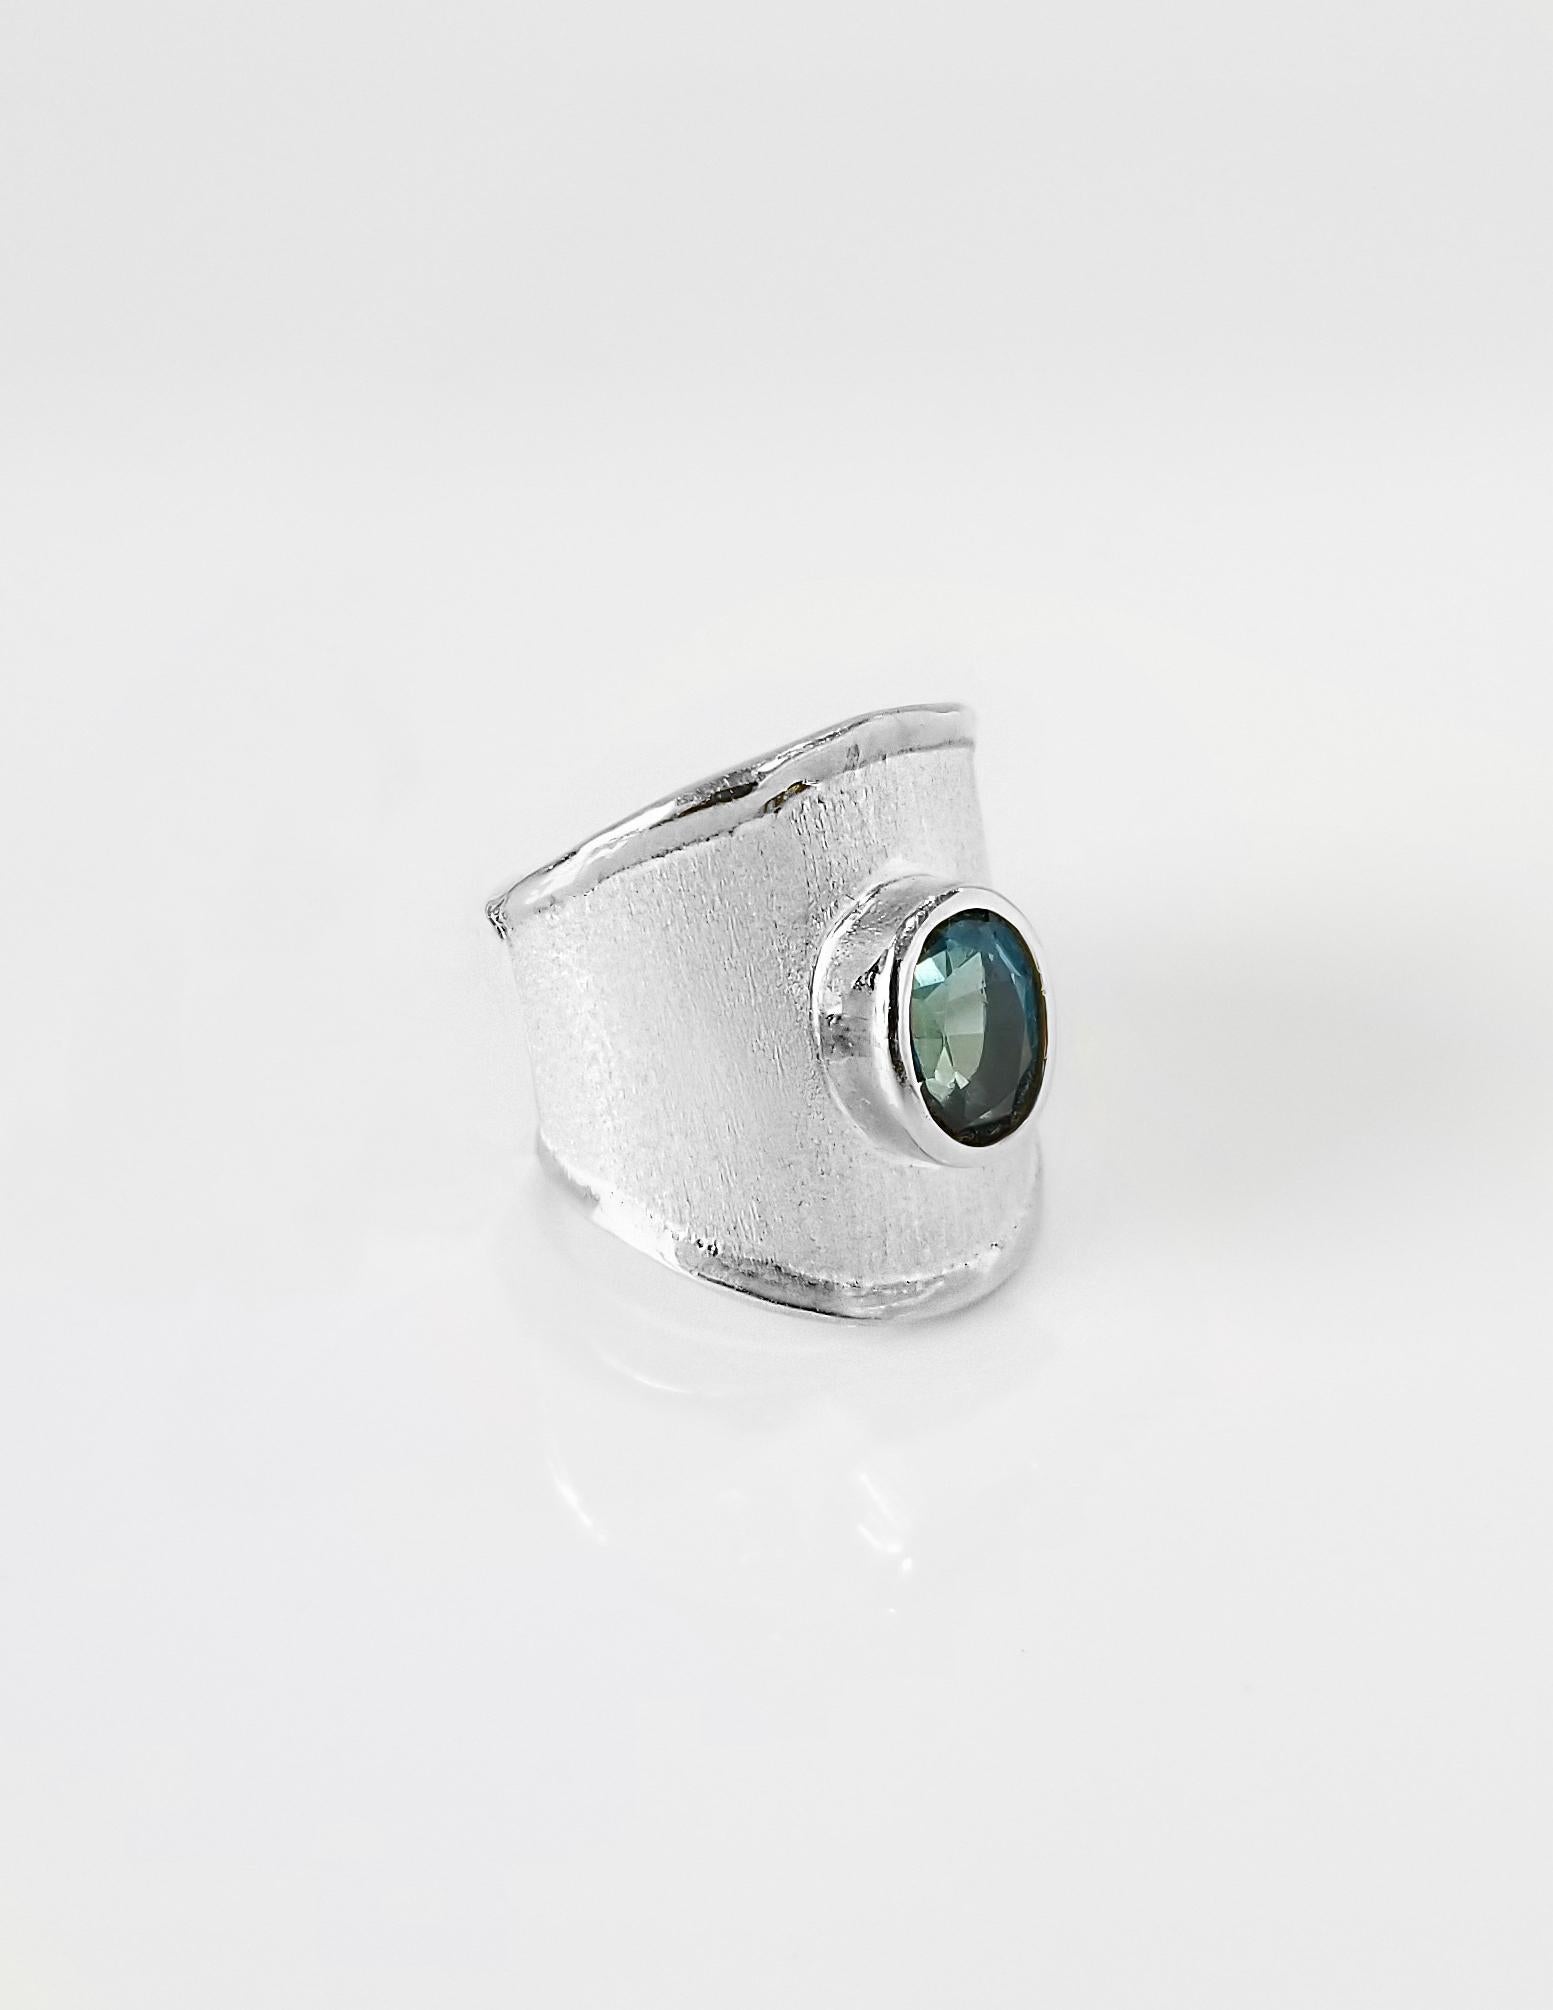 From Yianni Creations - Ammos Collection this is a 950 purity fine silver ring handmade in Greece with brushed texture plated with palladium to resist the elements. The unique look is completed by 1.60 Carat oval cut London blue topaz. Contact us